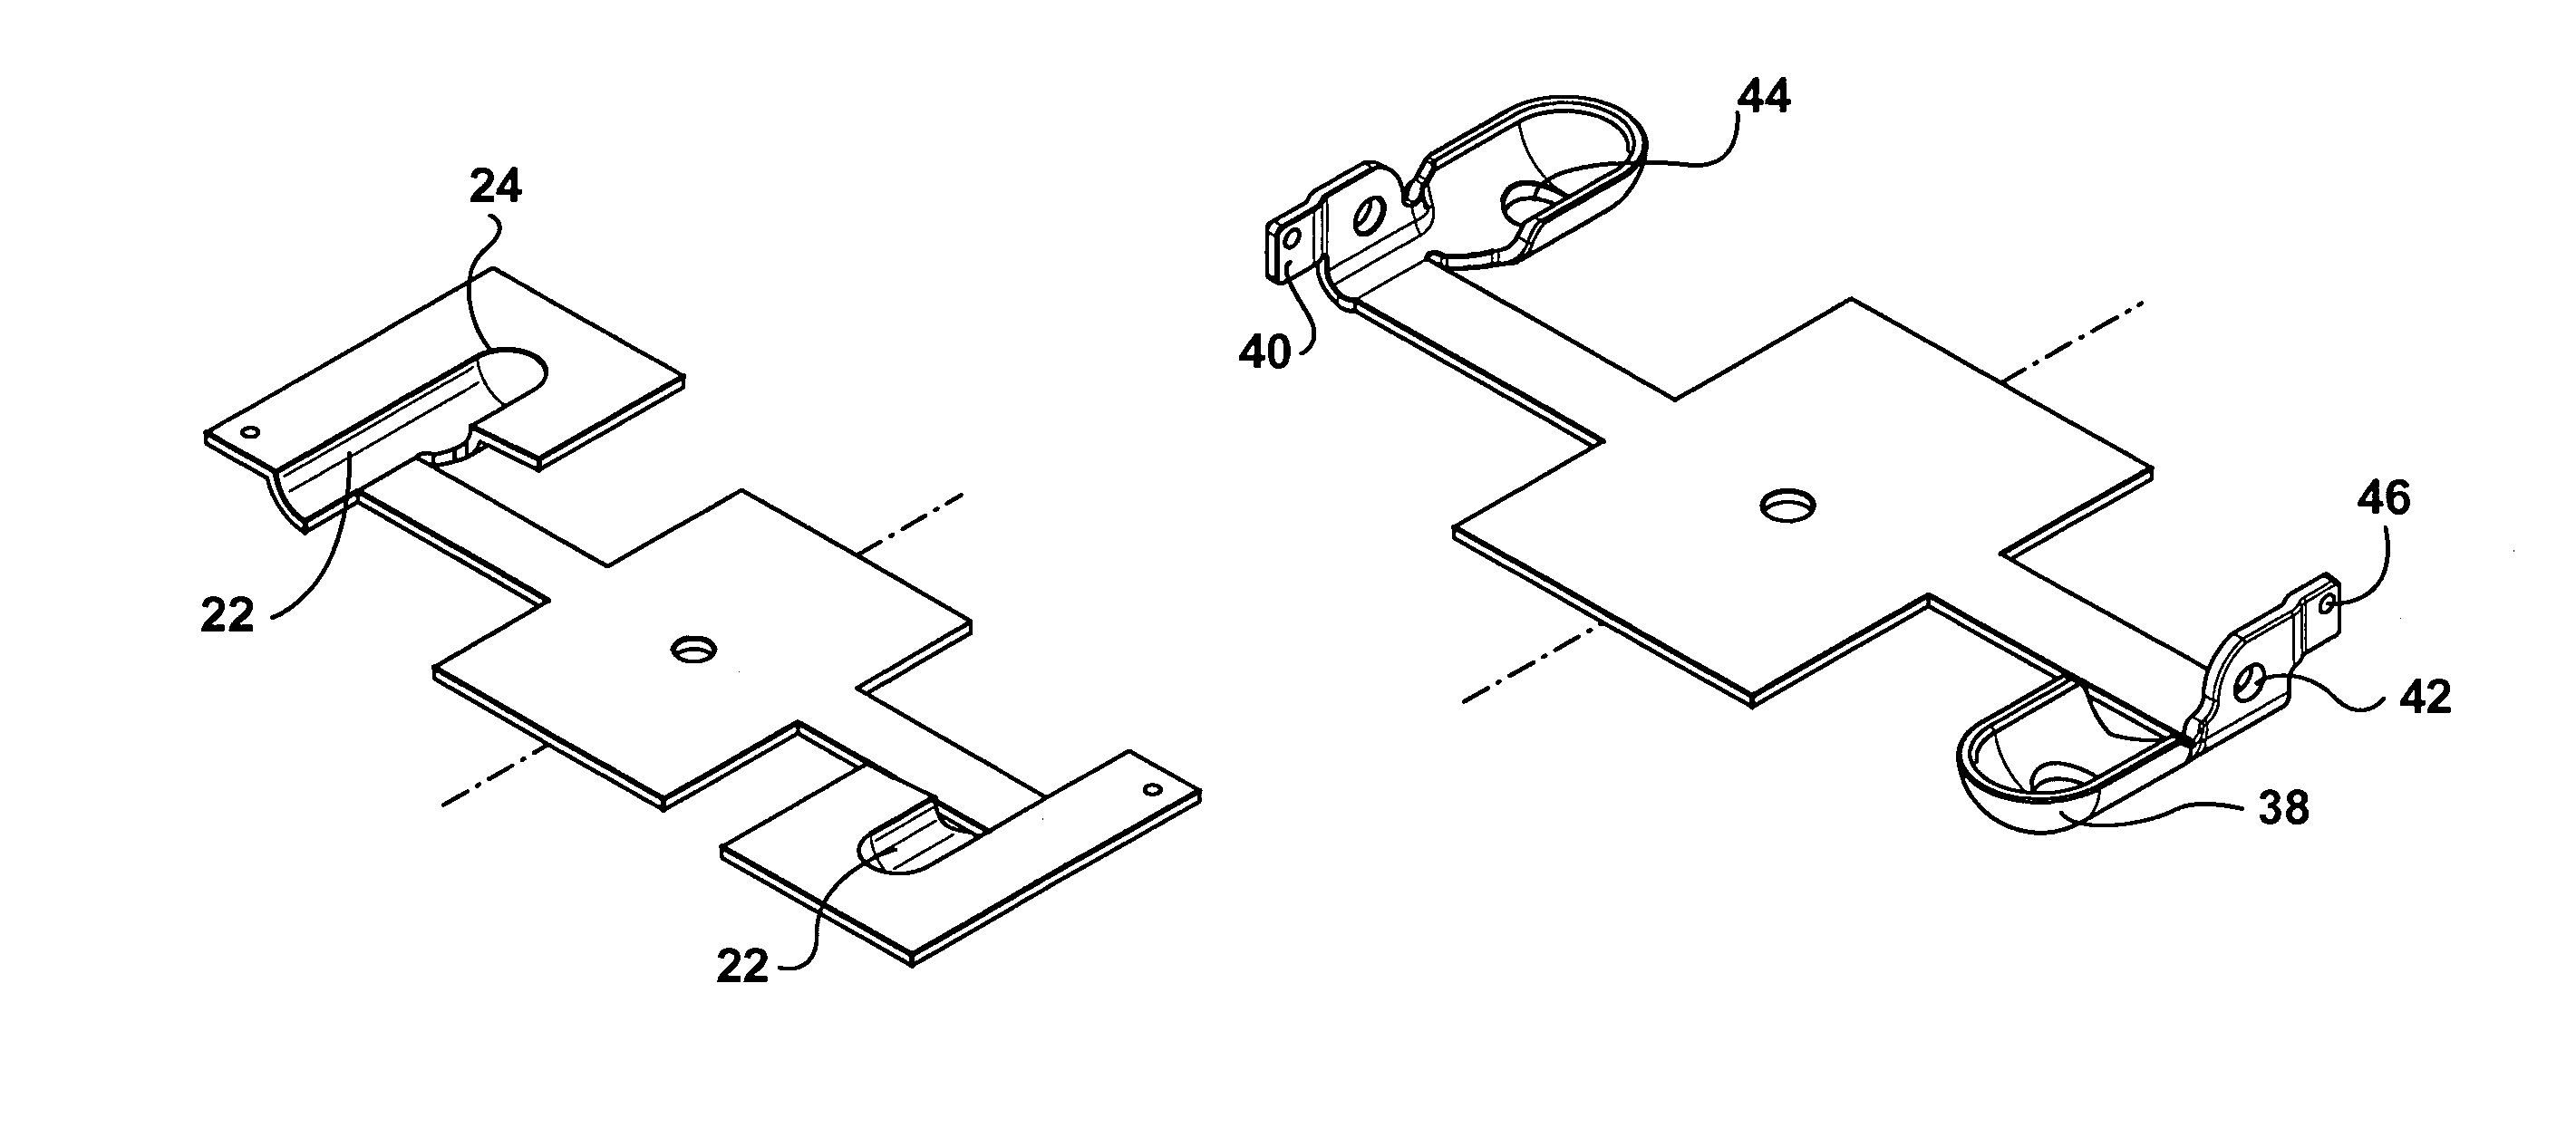 Method of manufacturing a stamped biopsy forceps jaw